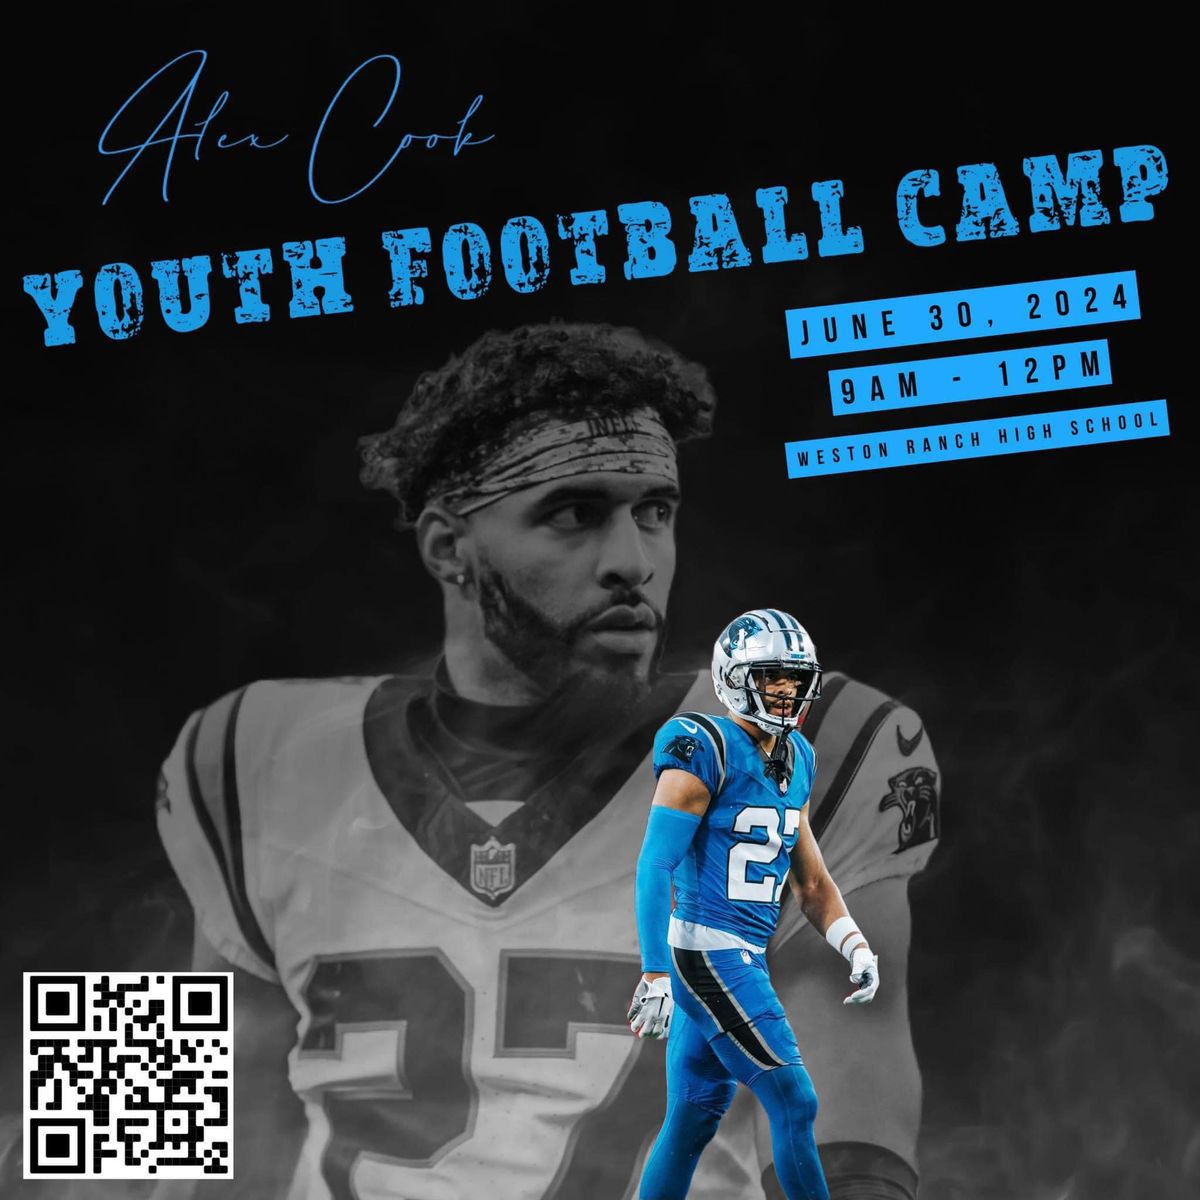 Sign-ups closed:  1st Annual Alex Smith Football Camp